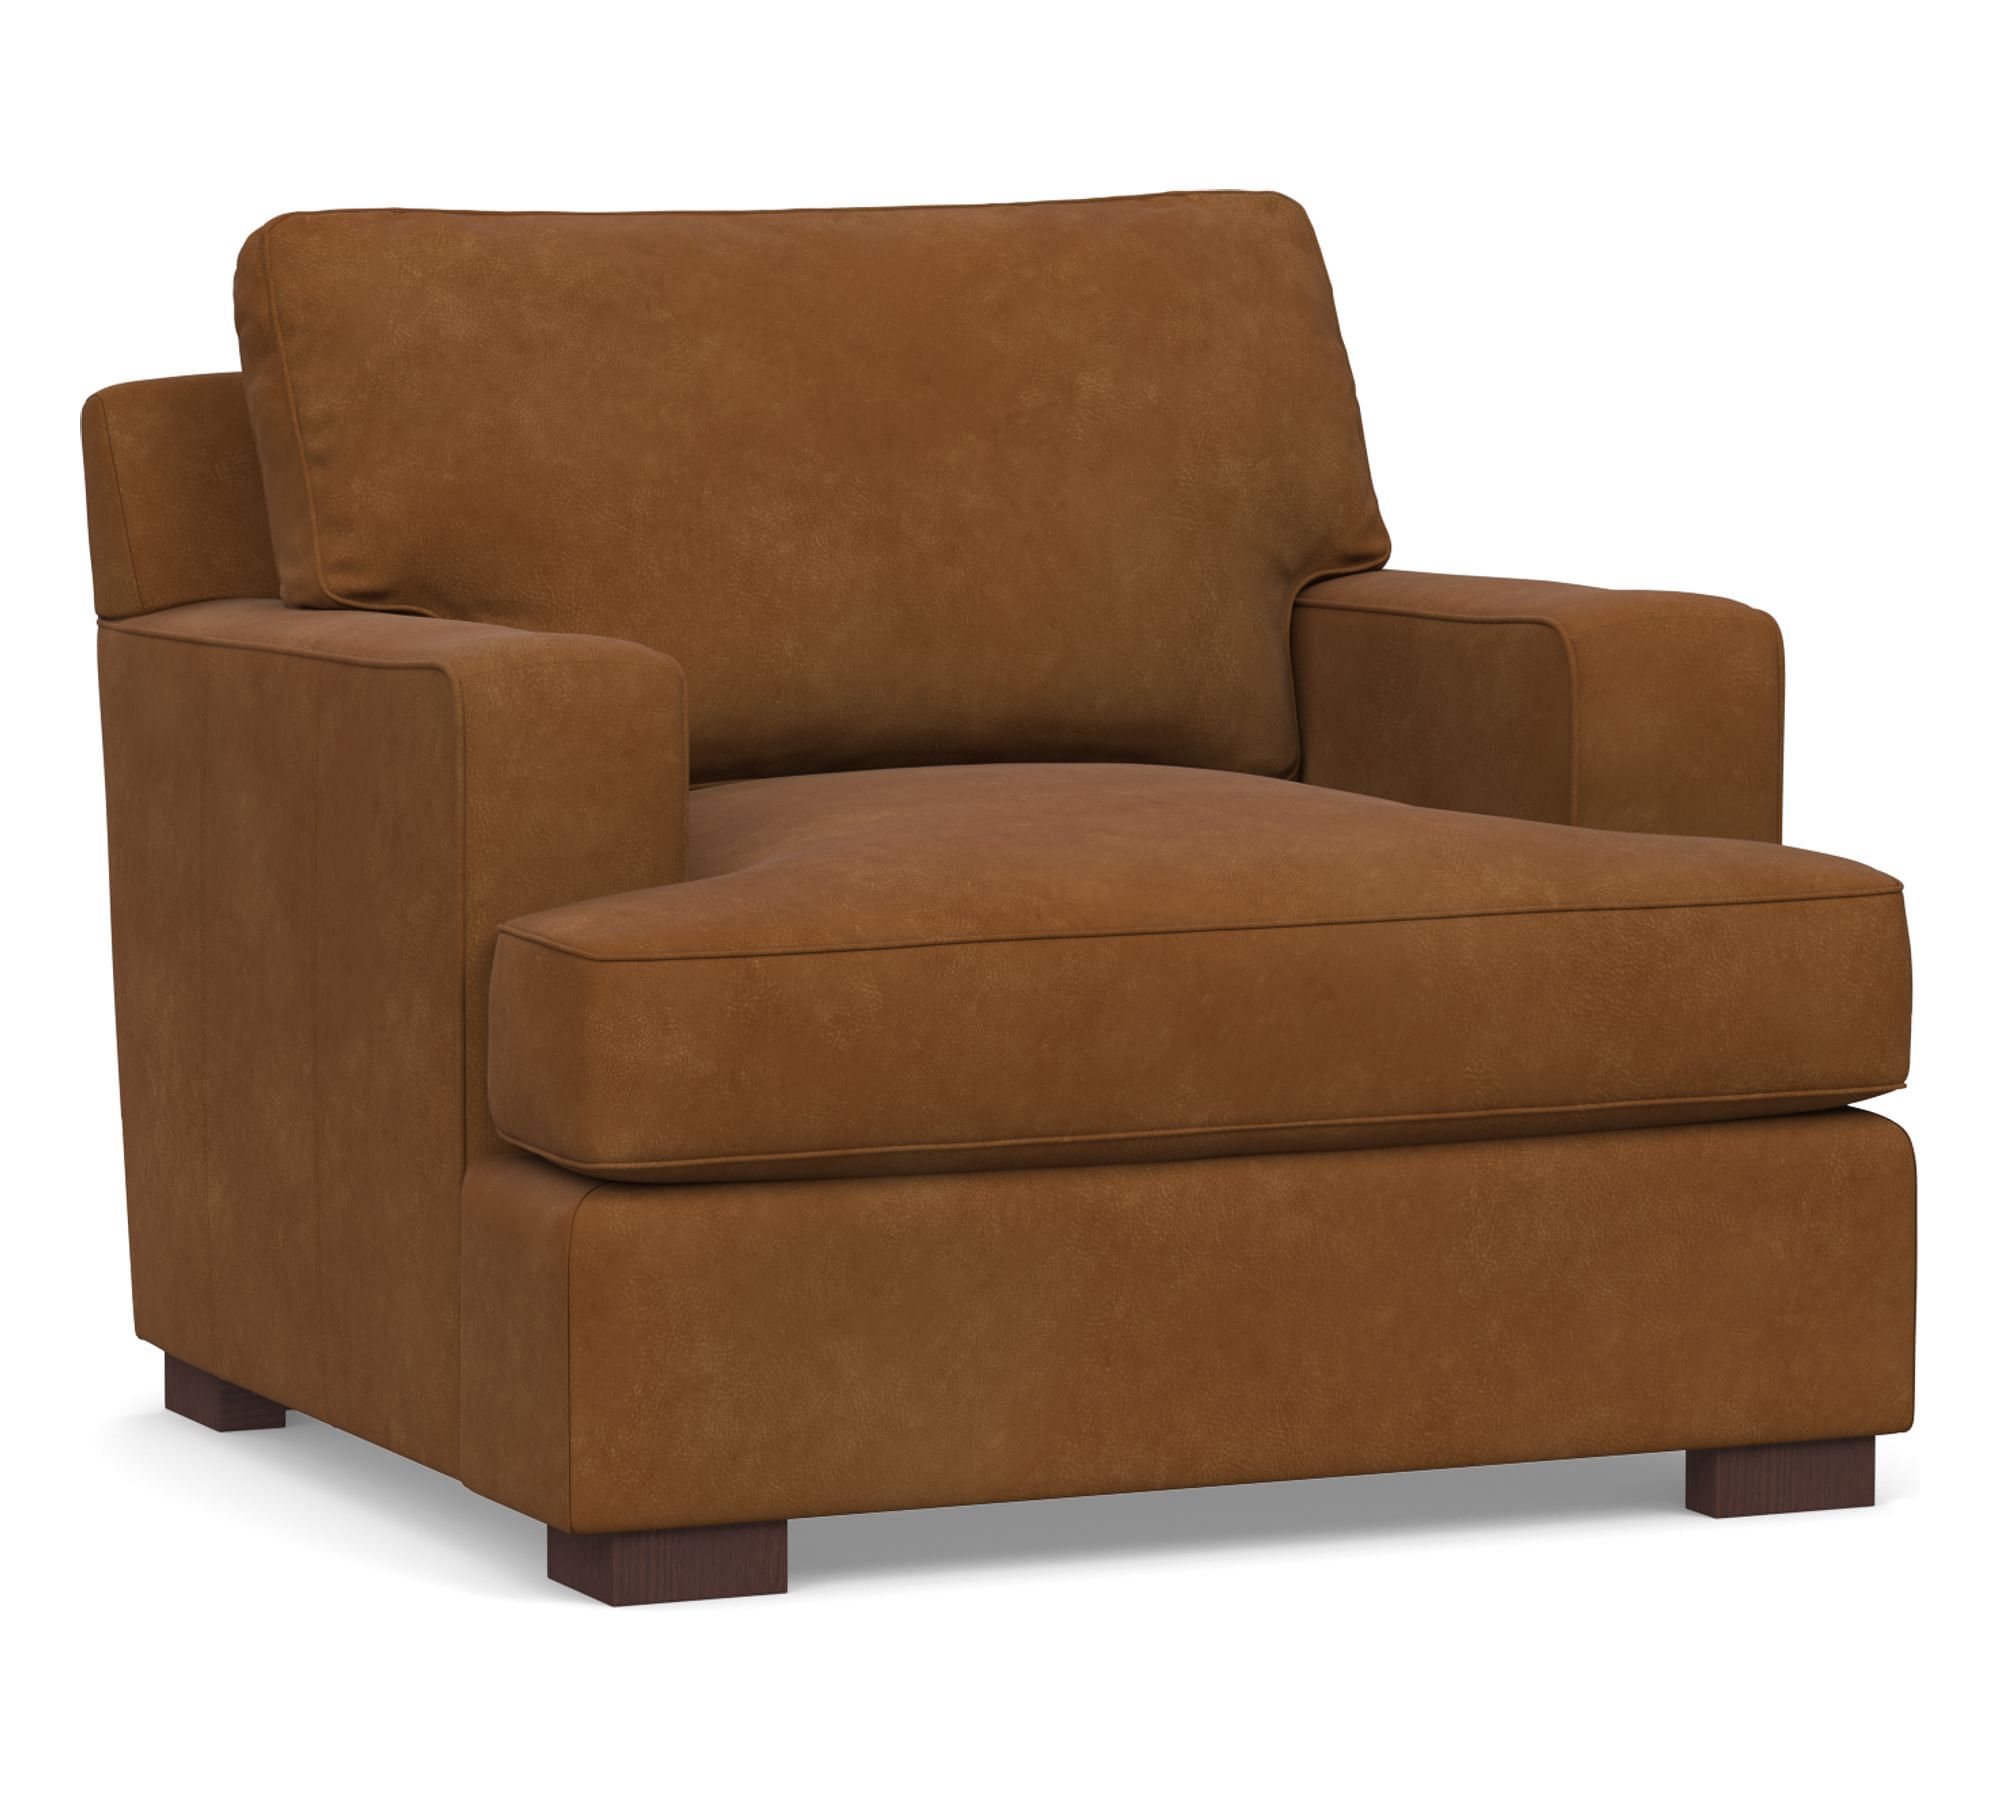 Townsend Square Arm Leather Chair